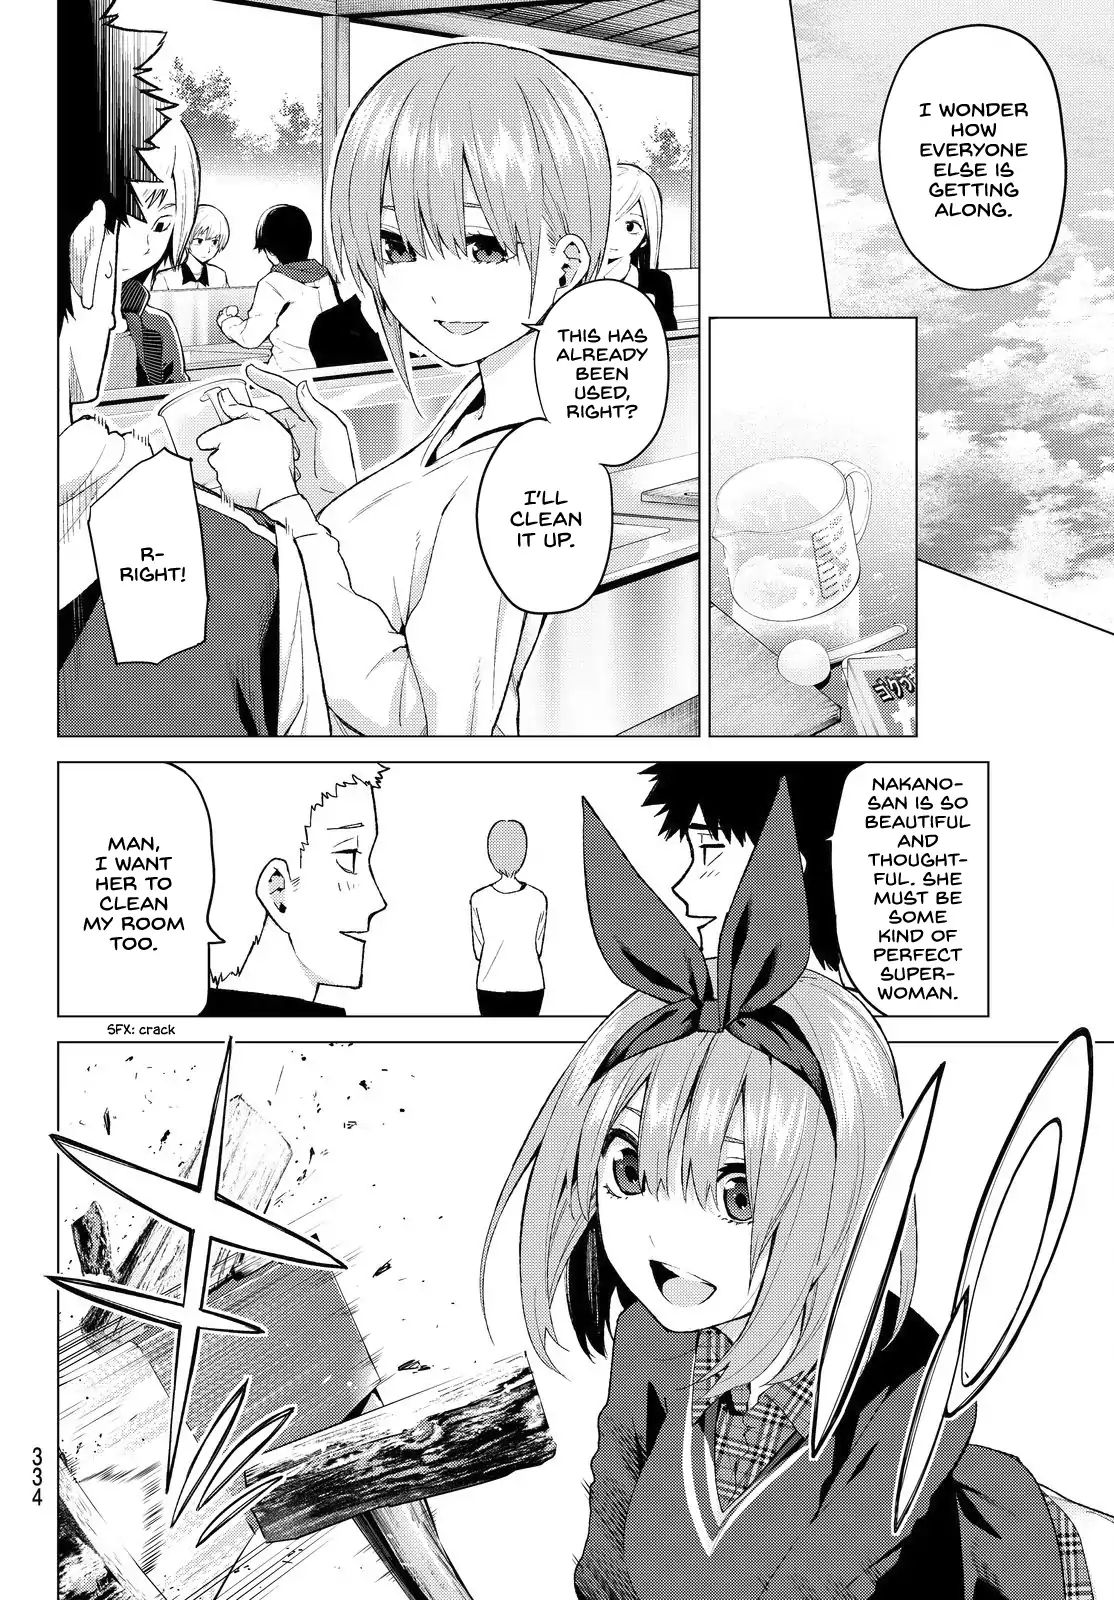 Go-Toubun No Hanayome Vol.4 Chapter 25: The Legend That Binds - Day Two (1) - Picture 2